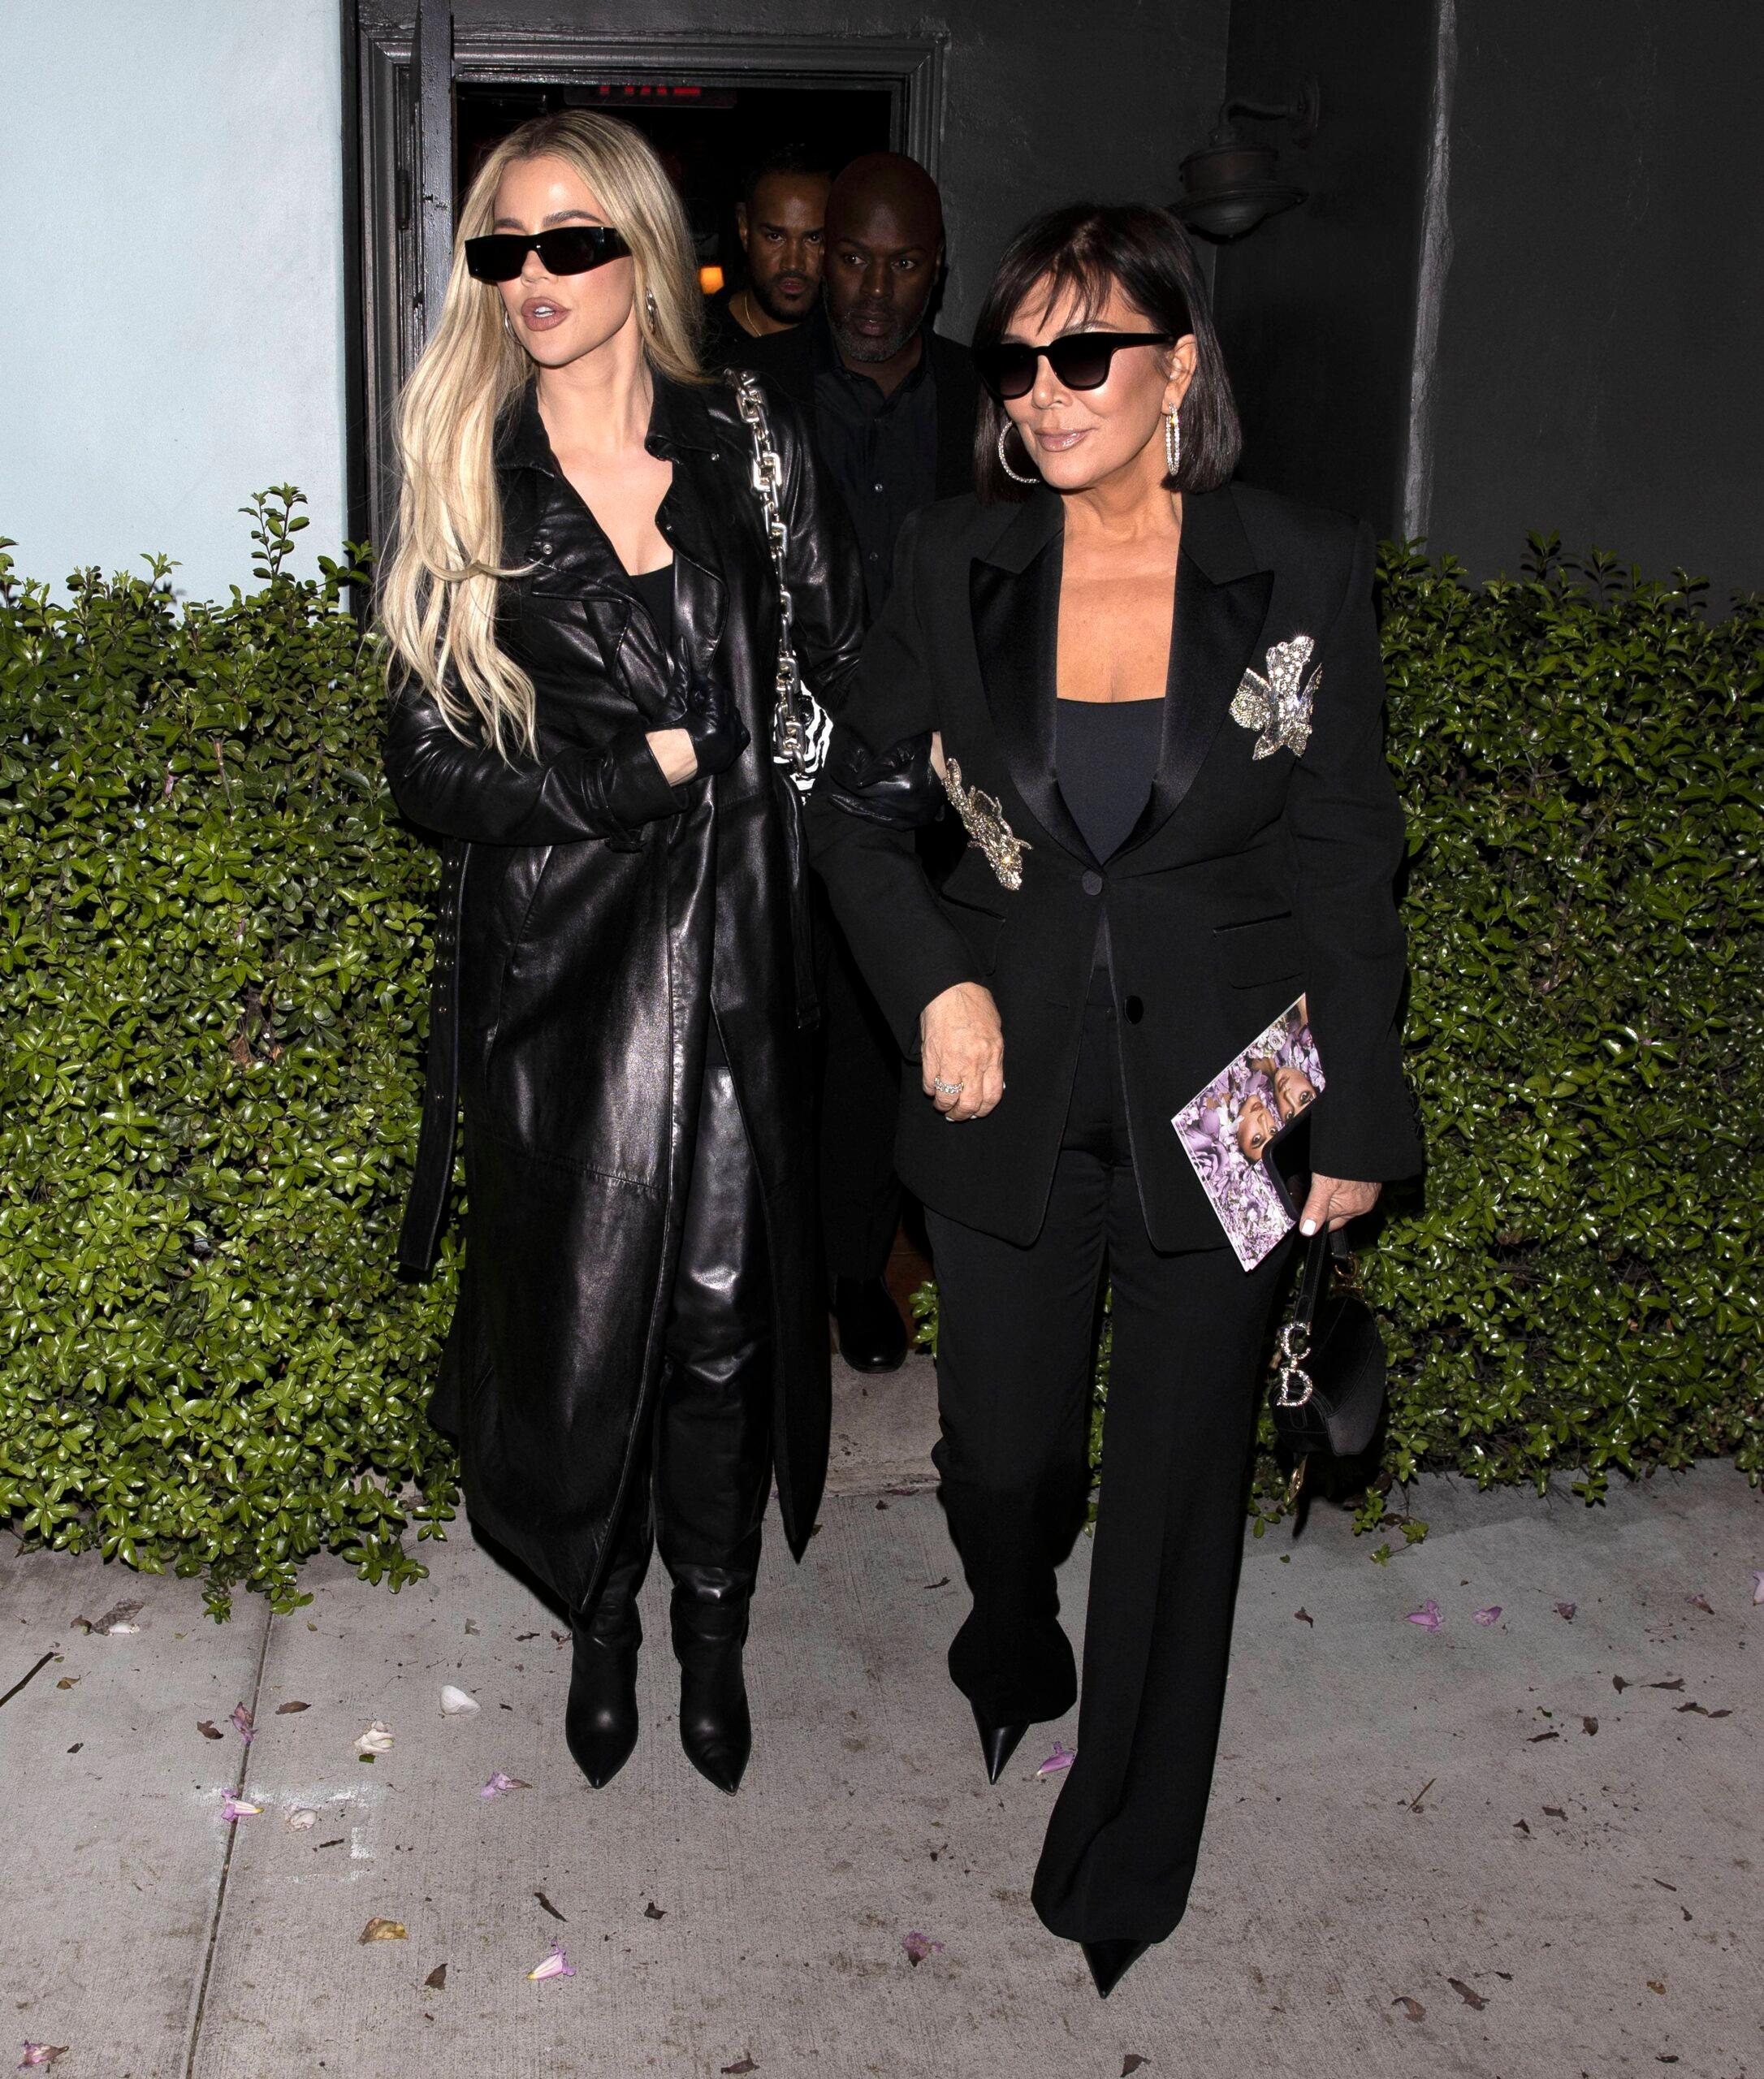 Khloe Kardashian, Kris Jenner and Korey Gamble leave dinner together at Osteria Mozza in Hollywood, CA